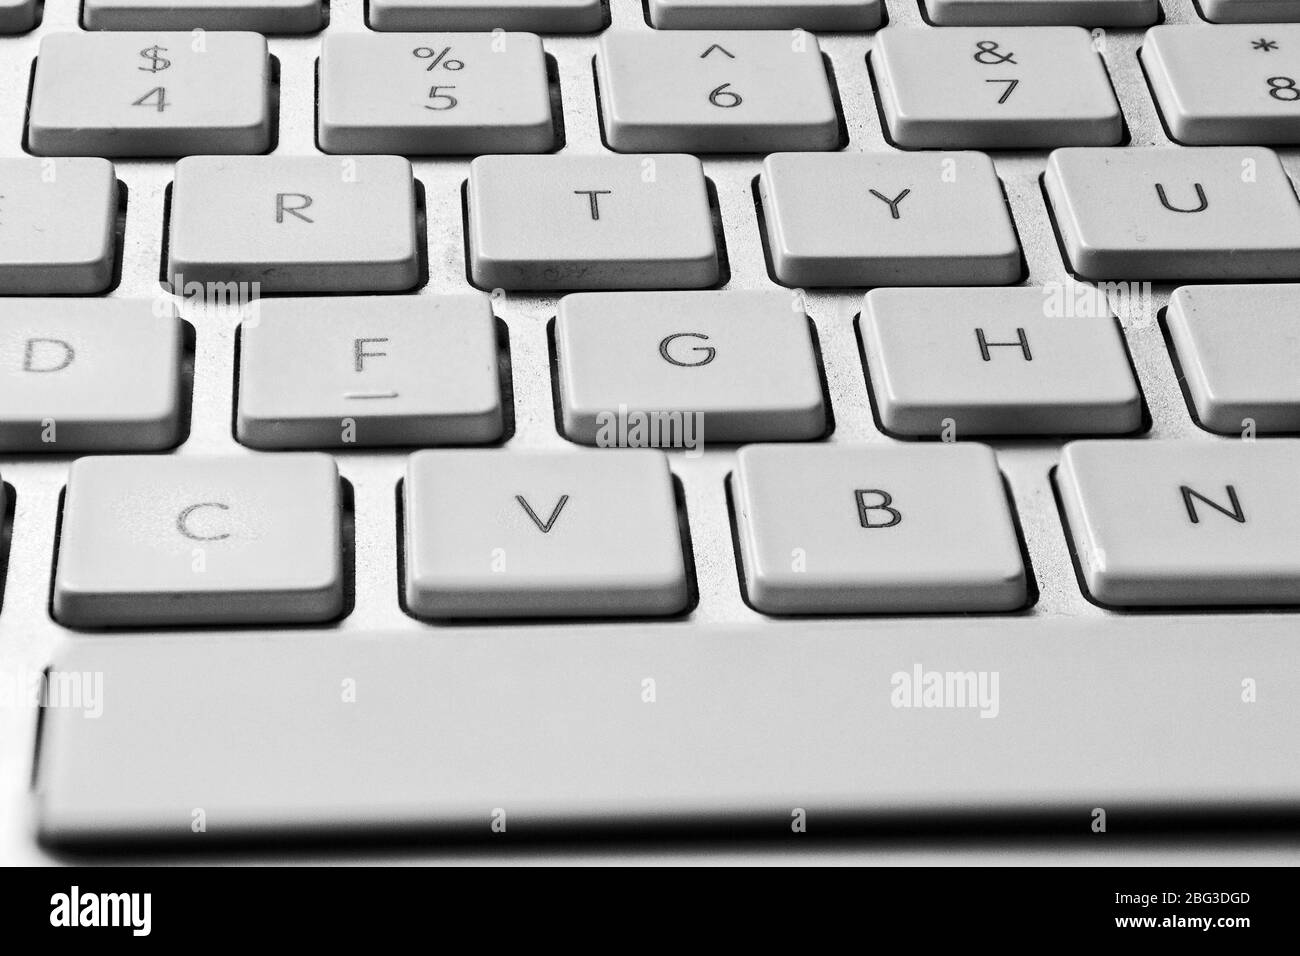 Close Up Image Of The Middle Section Of A Silver Coloured Computer Keyboard Clearly Showing White